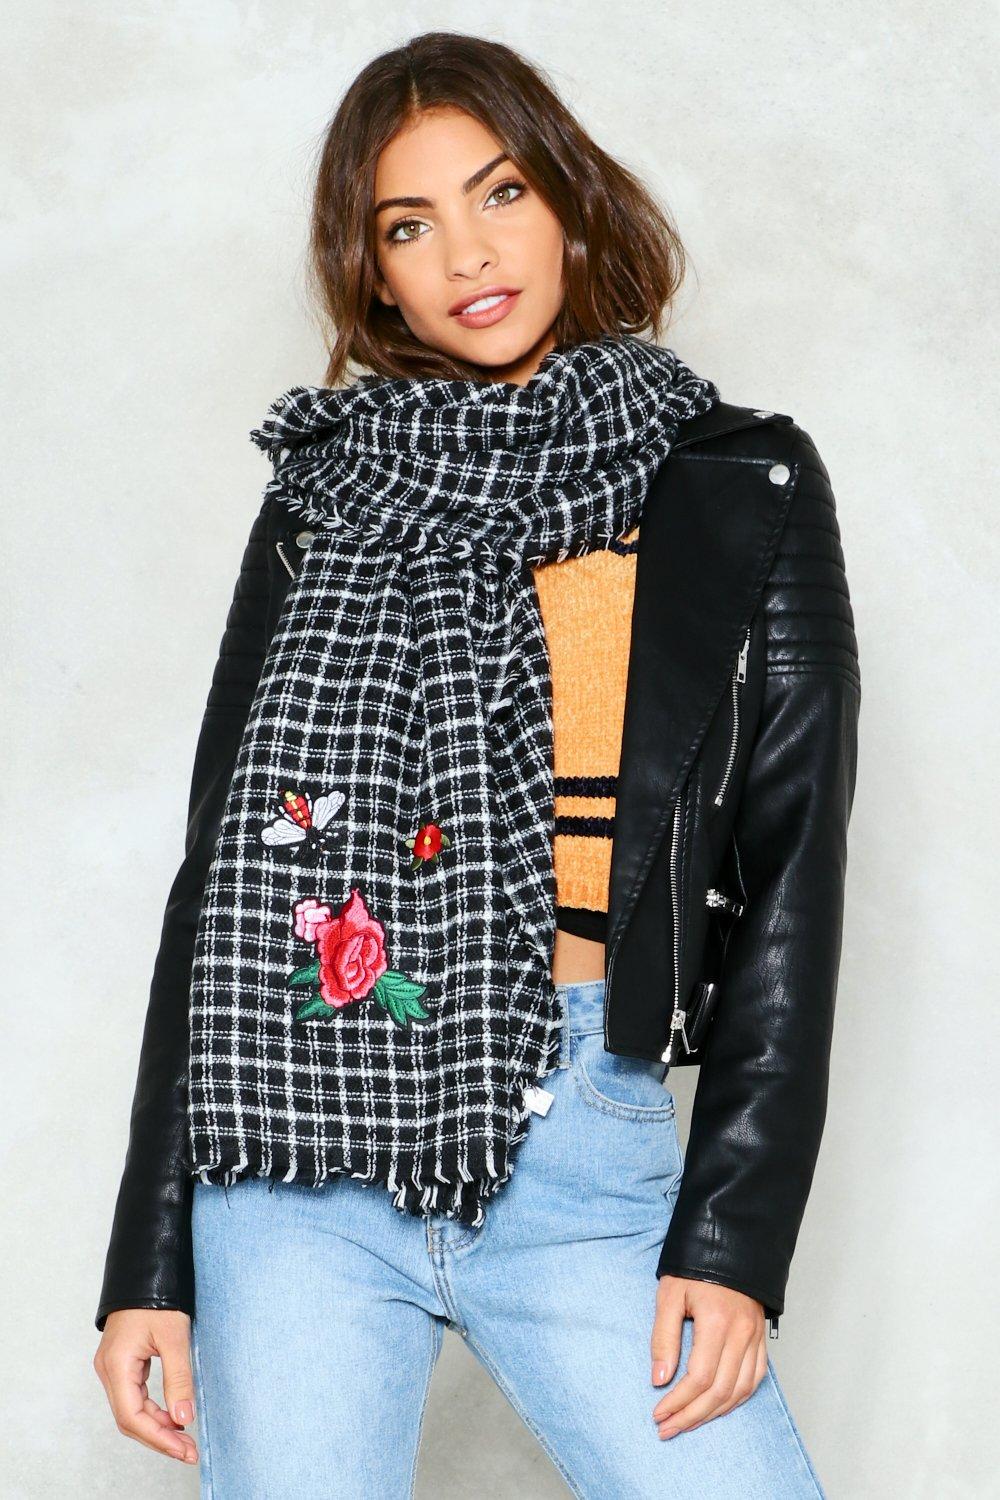 This is one of the best websites to find plaid scarves for women!